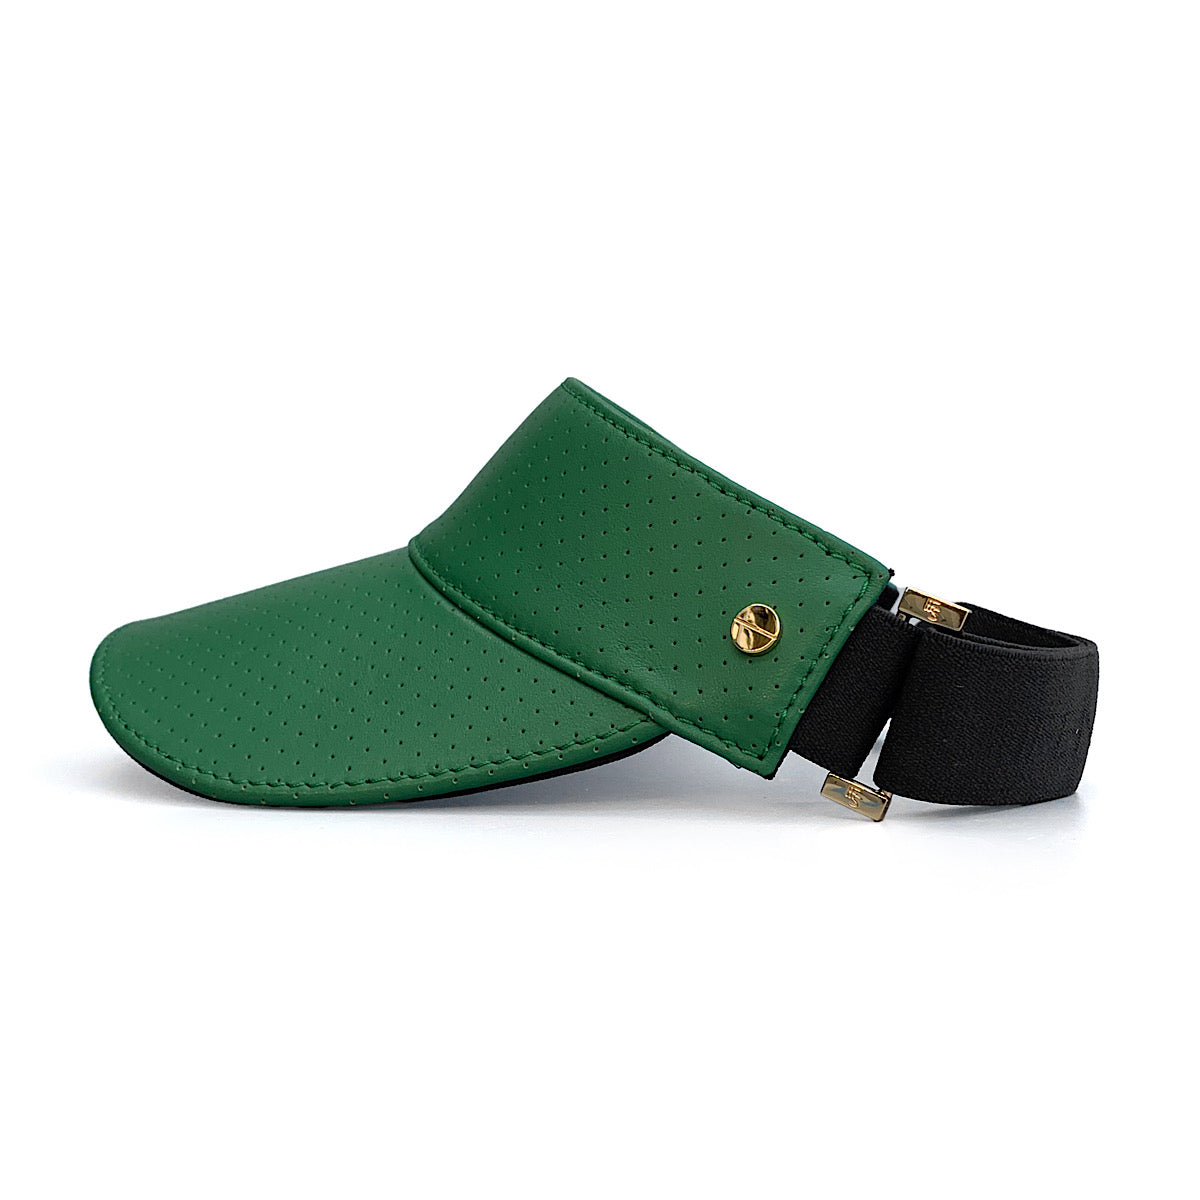 The Visor - Court Green Leather/Navy Trim & Gold